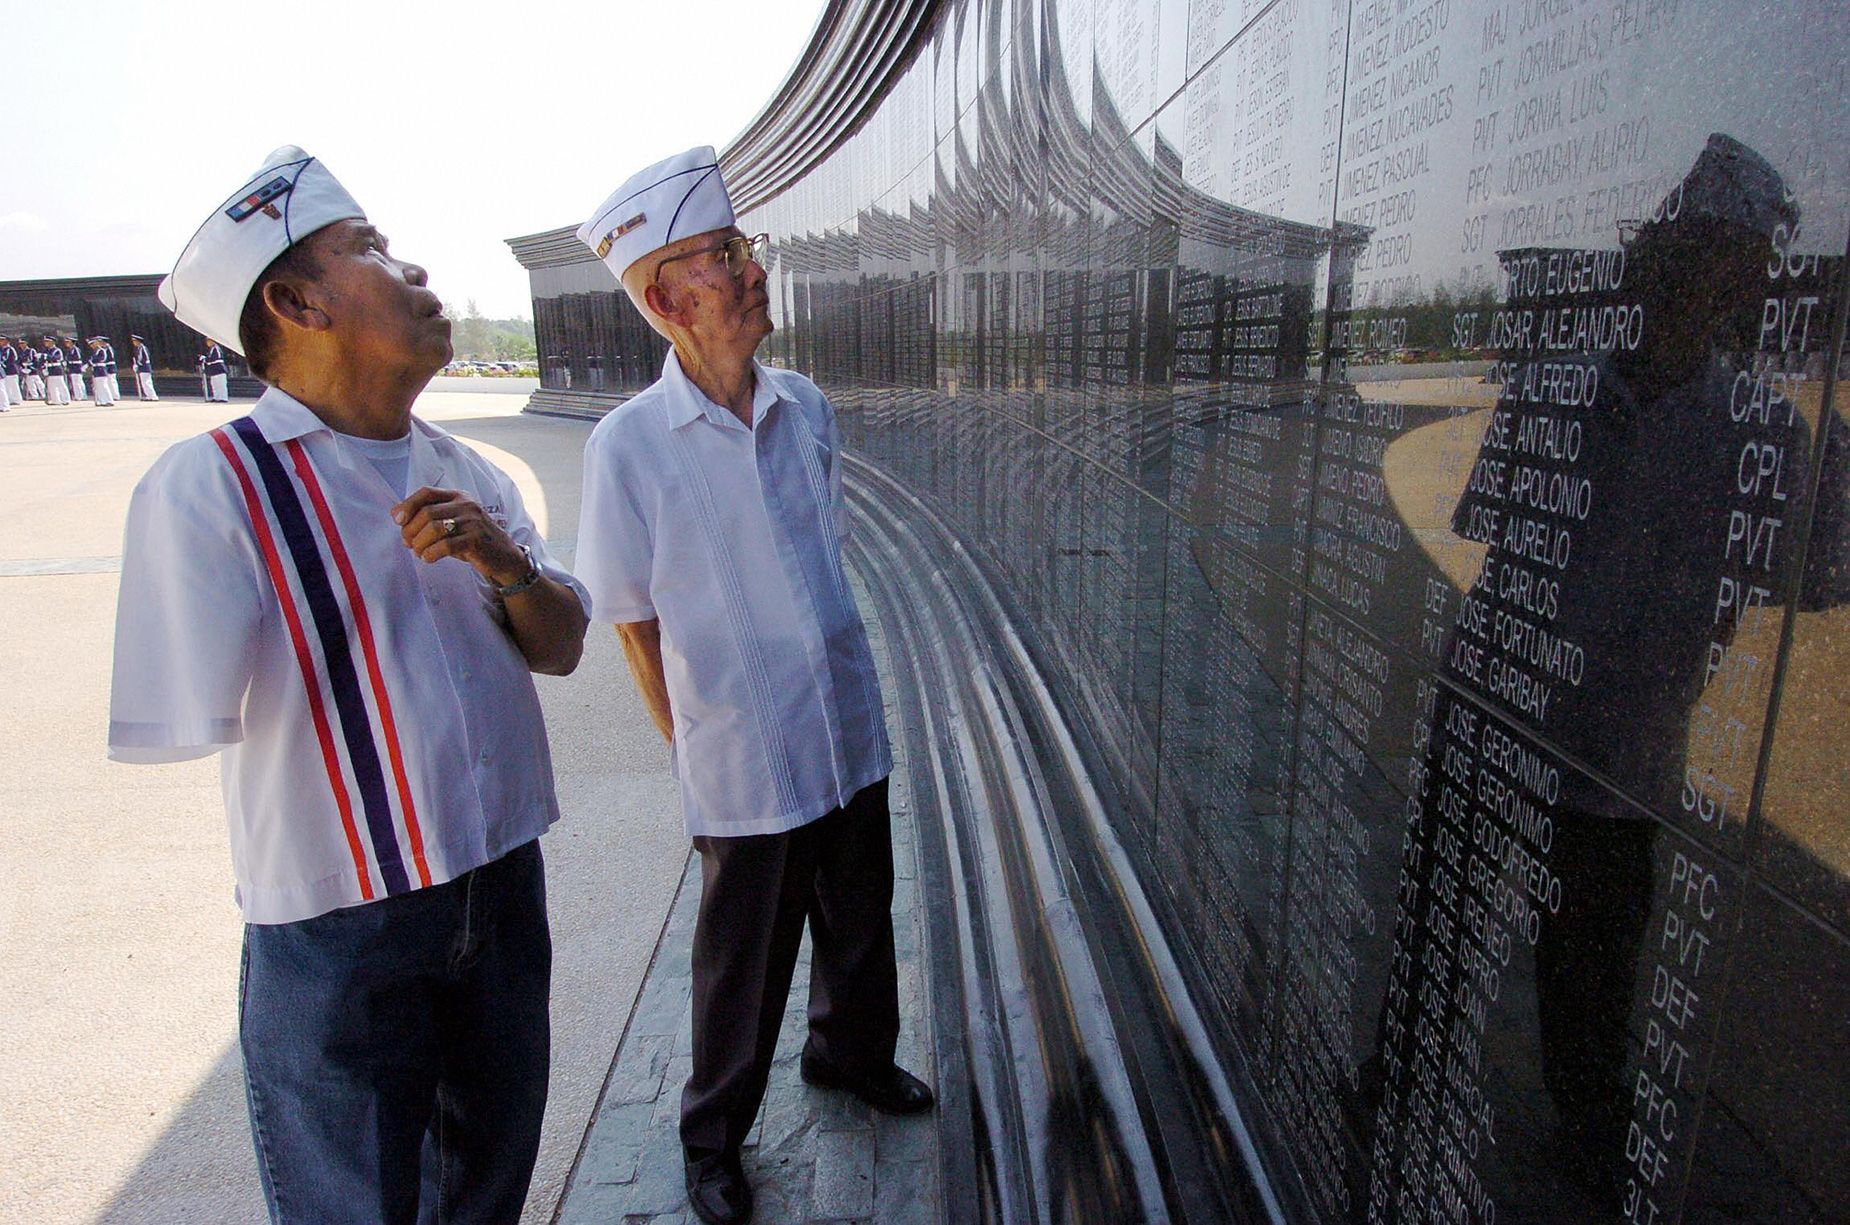 Disabled Filipino World War II veteran and death march survivor Manuel Abrazado, 80, (L) and his comrade Emilio Aquino, 86, (R) look at the names of their comrades at the Capas National Shrine in northern Tarlac province on April 6, 2004 during a memorial day marking the fall of Bataan. Romeo Gacad/AFP/Getty Images